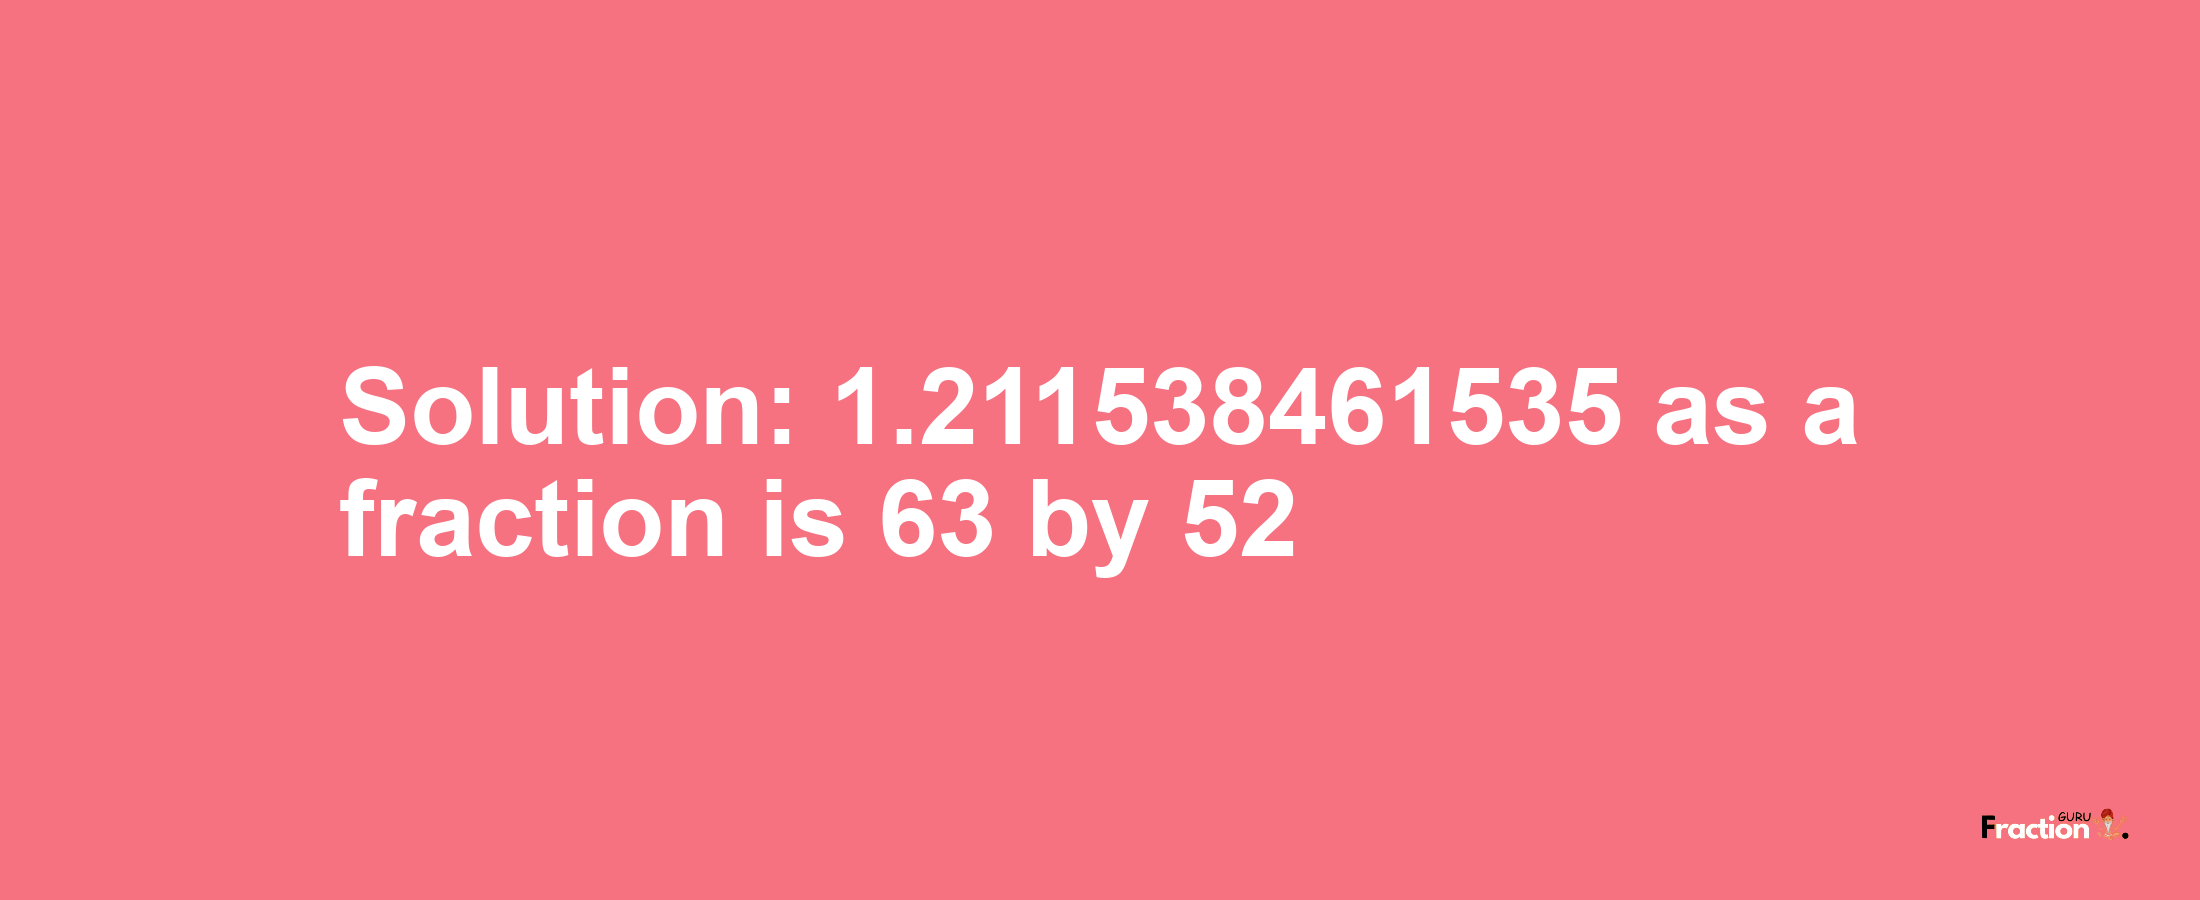 Solution:1.211538461535 as a fraction is 63/52